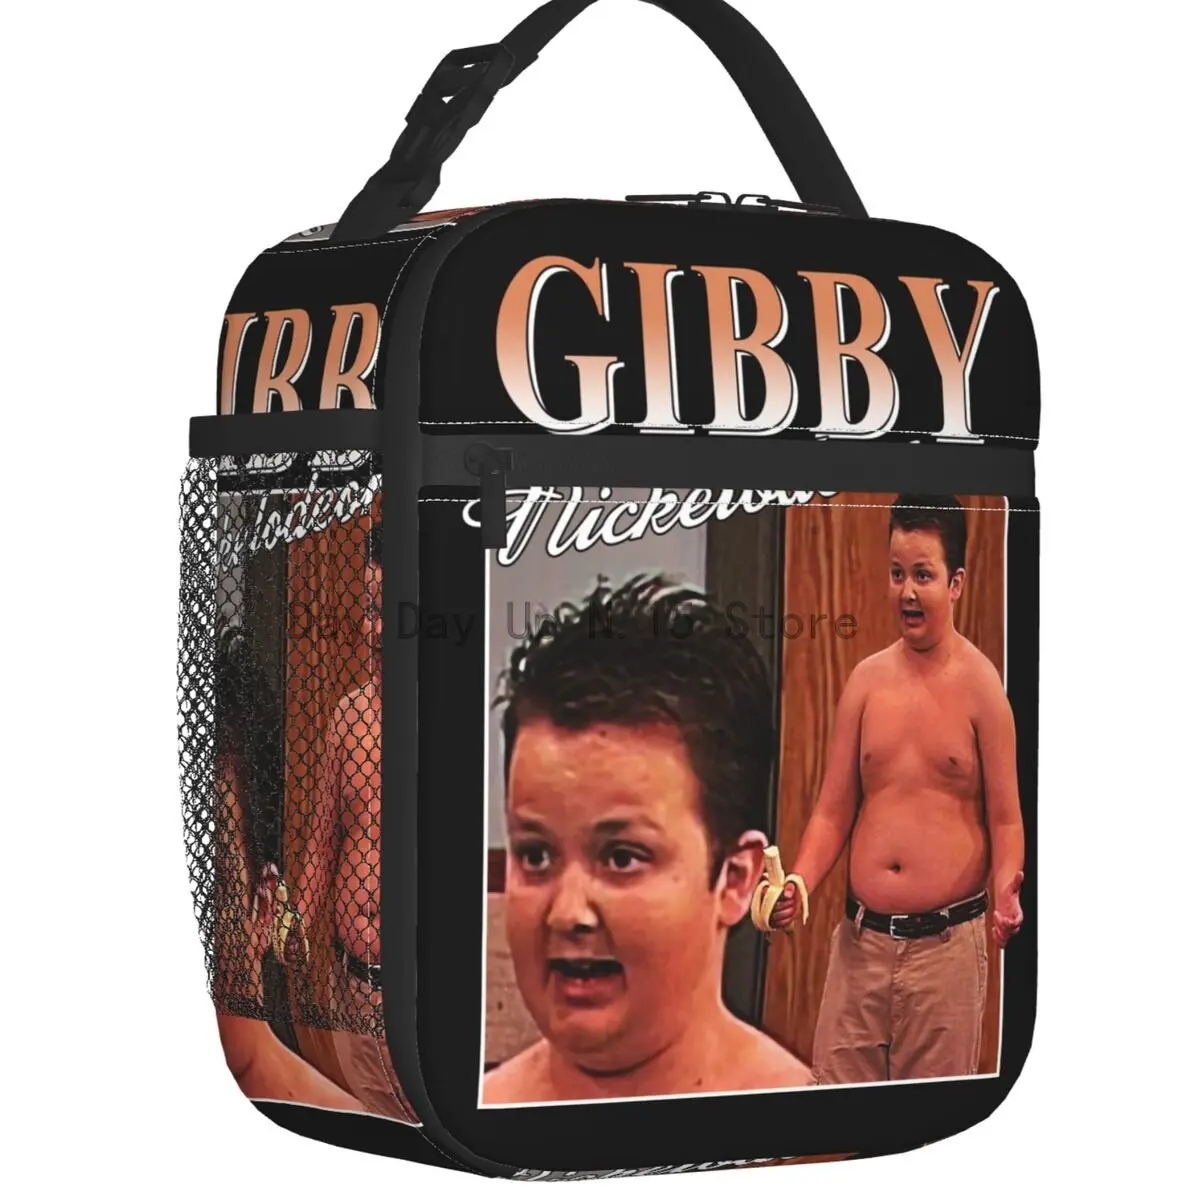 

Funny Gibby Icarly Meme Insulated Lunch Bag for Women Portable TV Show Noah Munck Cooler Thermal Bento Box Office Work School